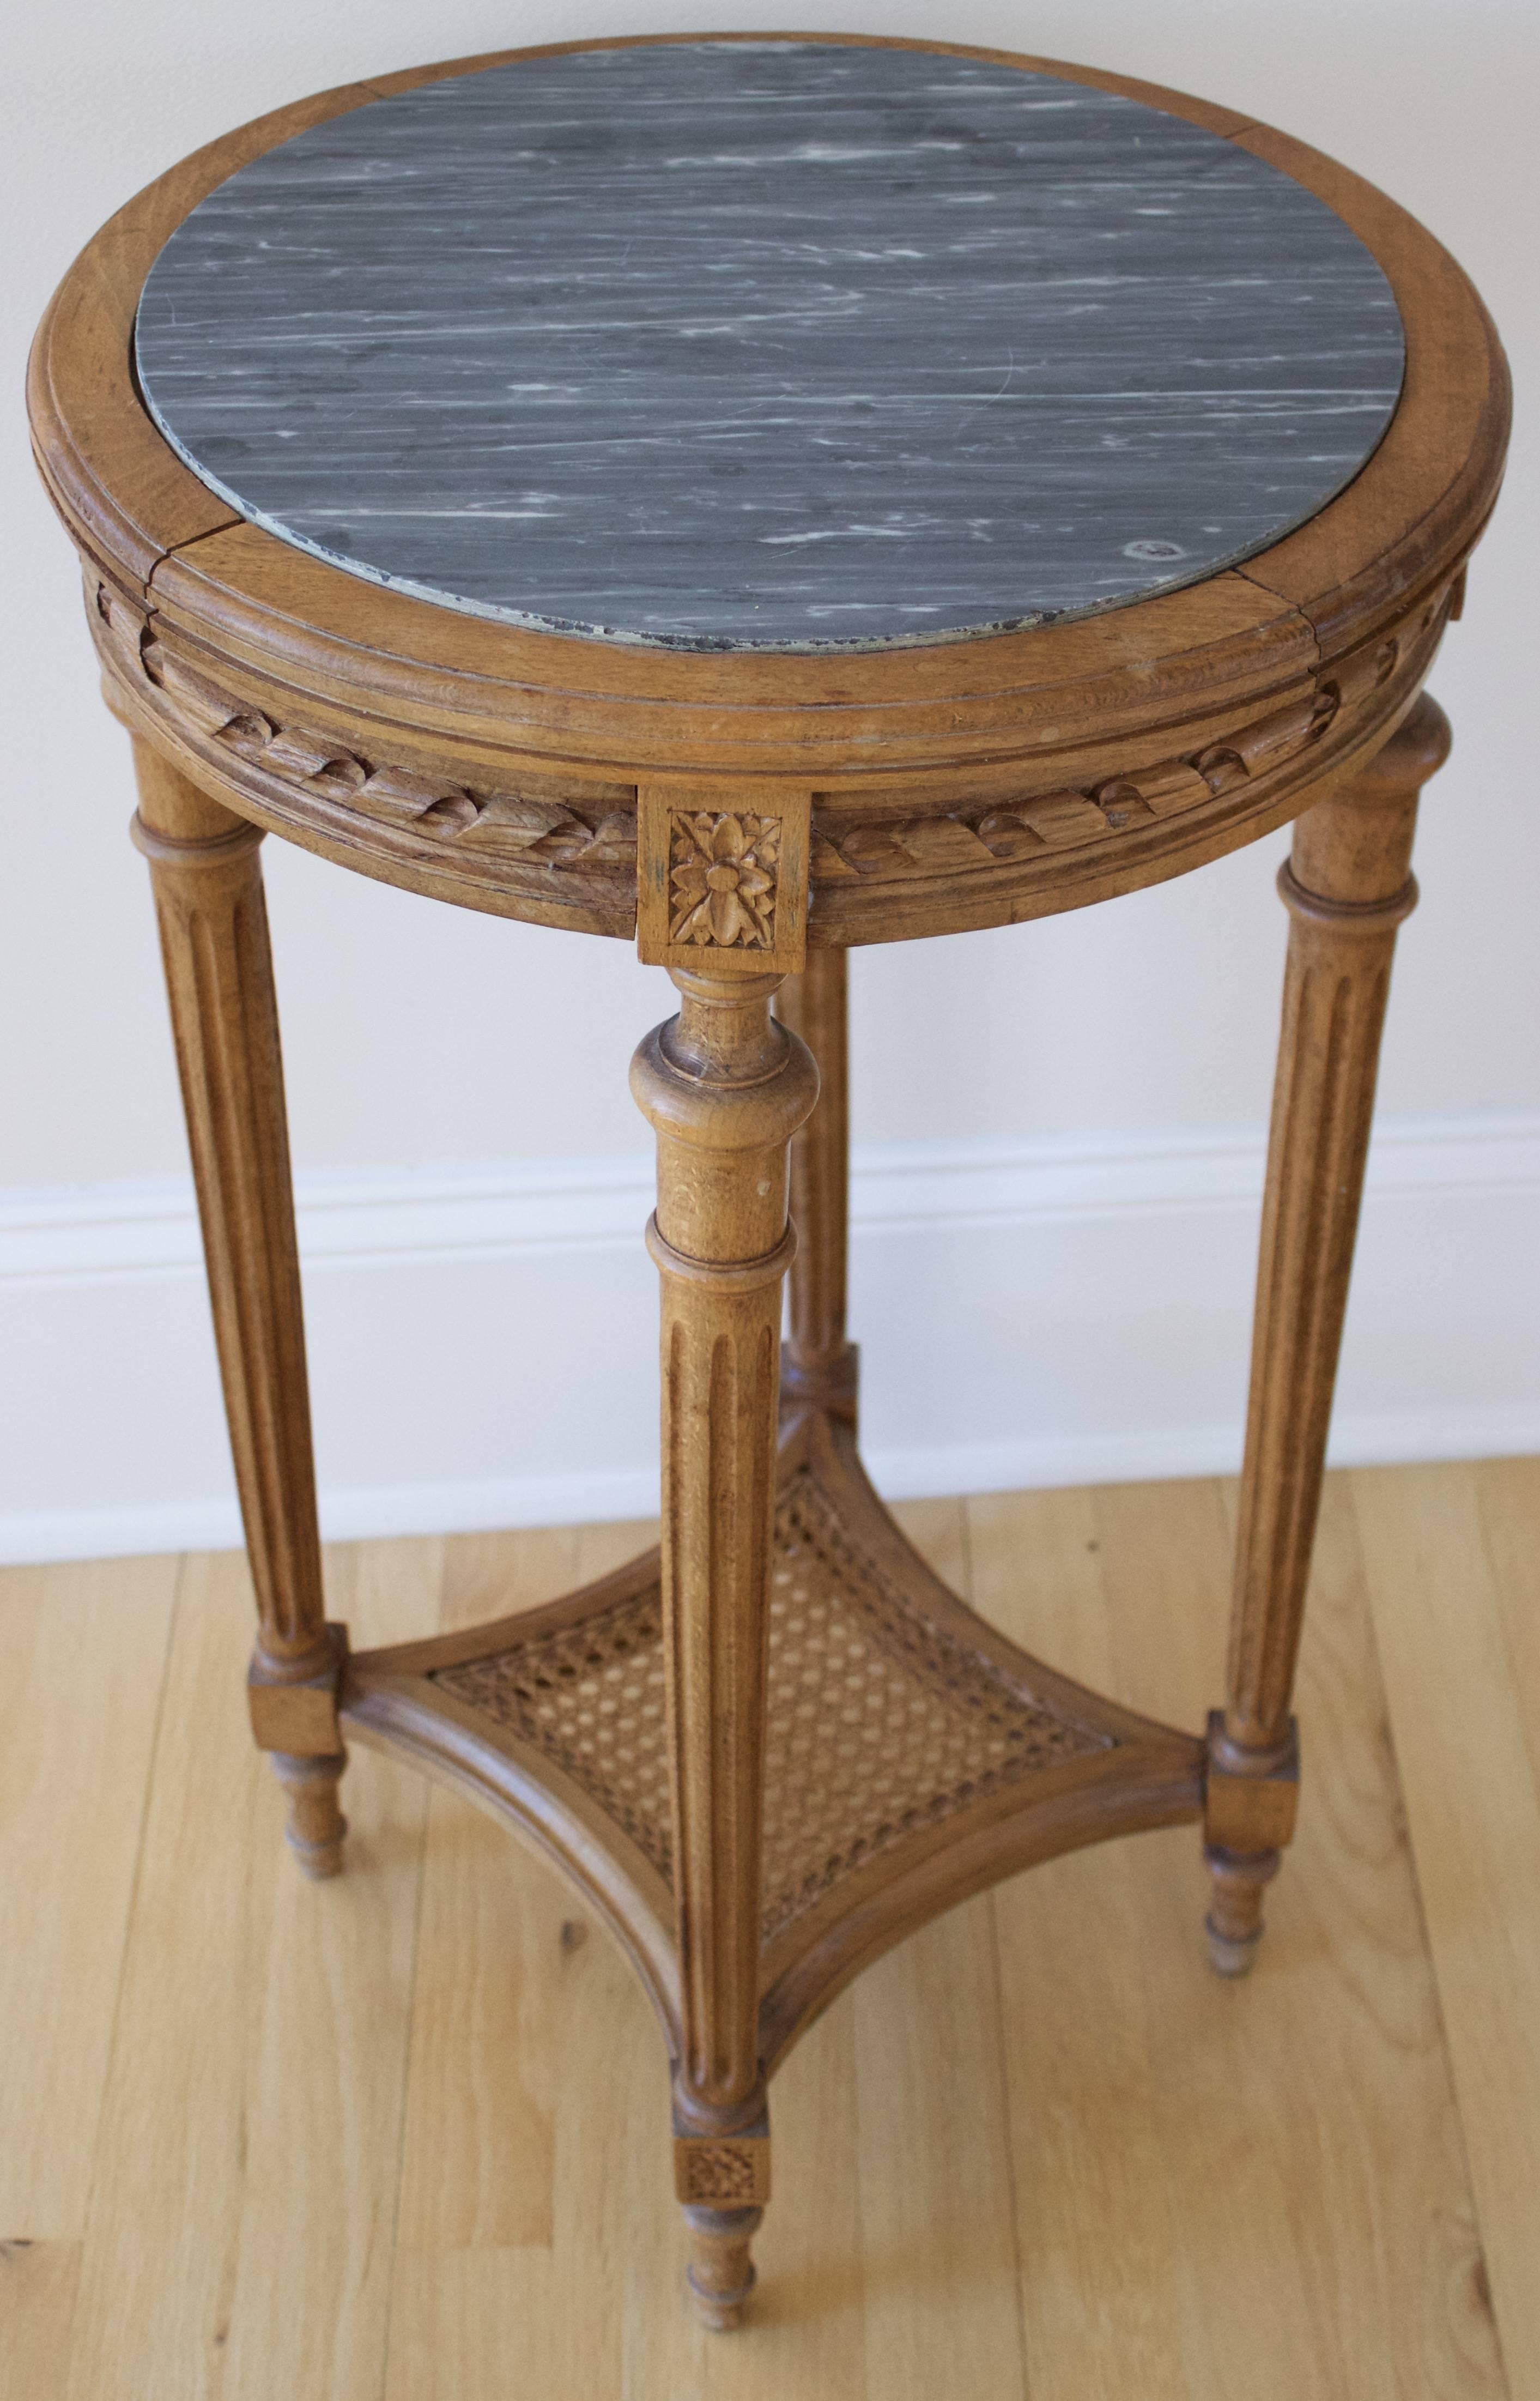 Gray Saint-Anne marble top insert on this beechwood table made in Louis XVI style. Carved 